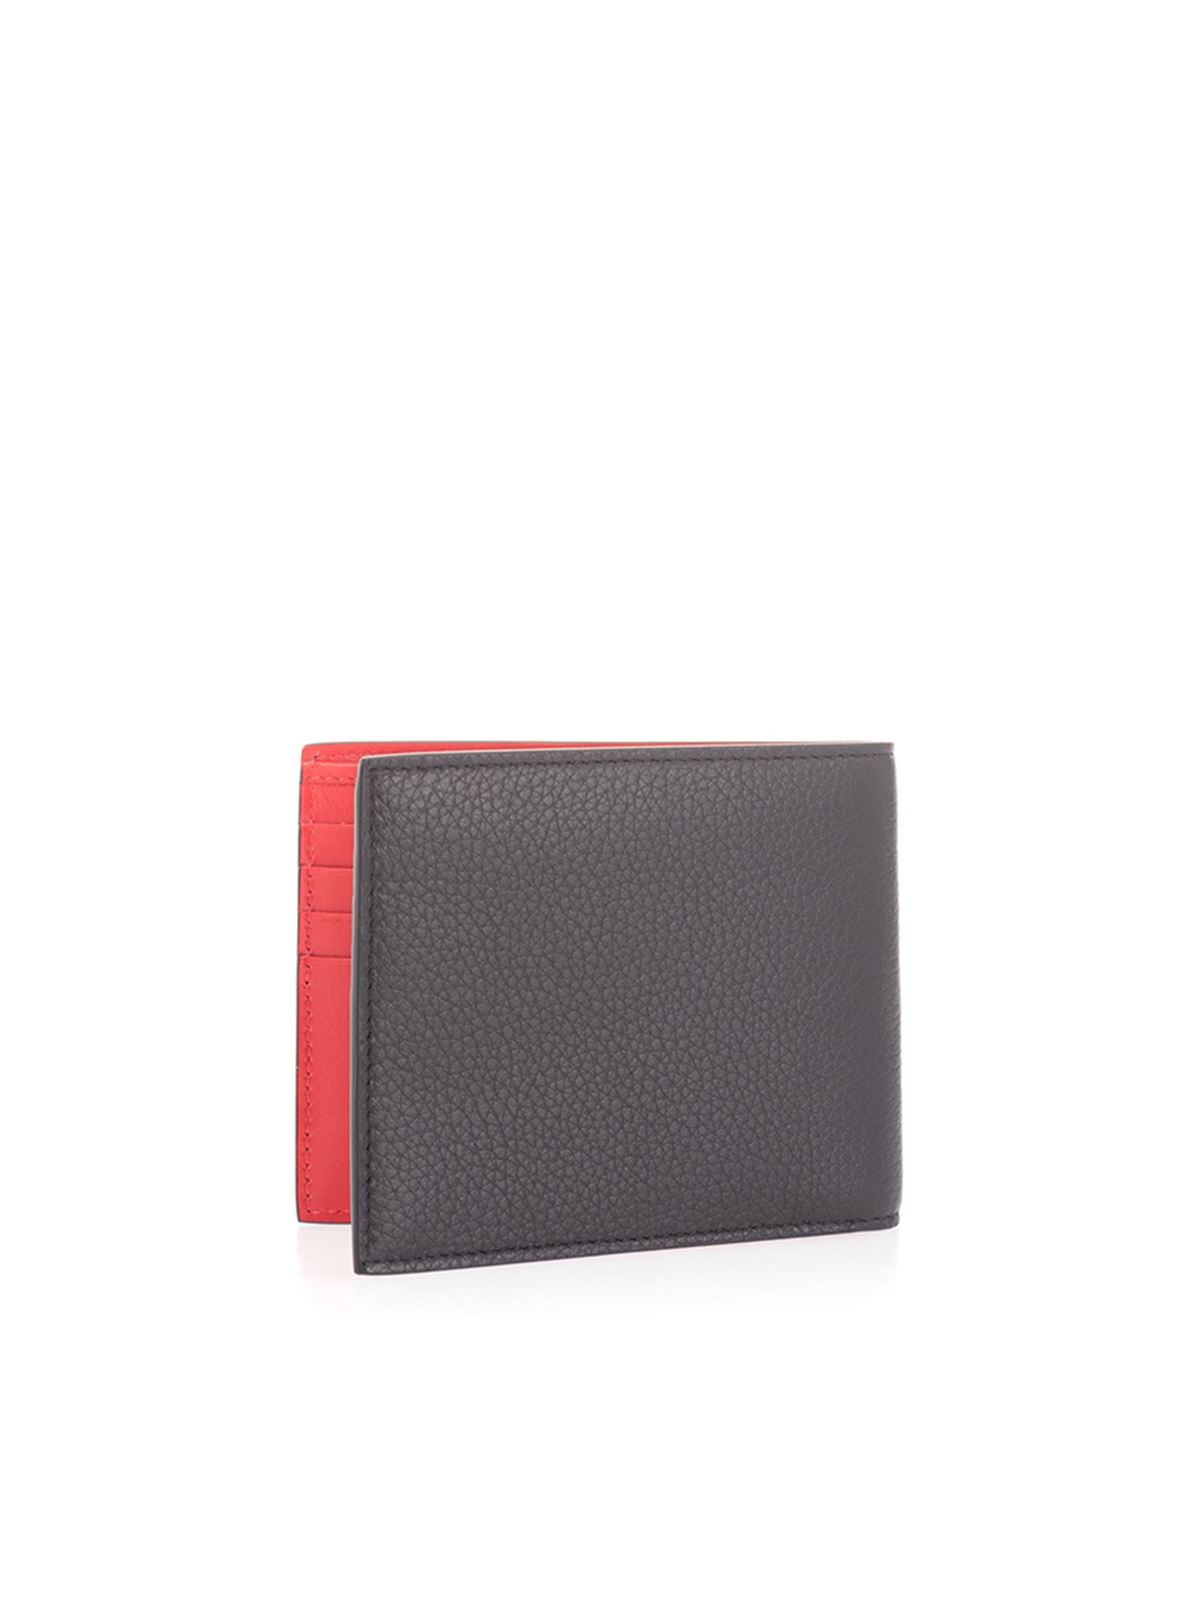 Coolcard - Wallet - Embossed calf leather - Black - Christian